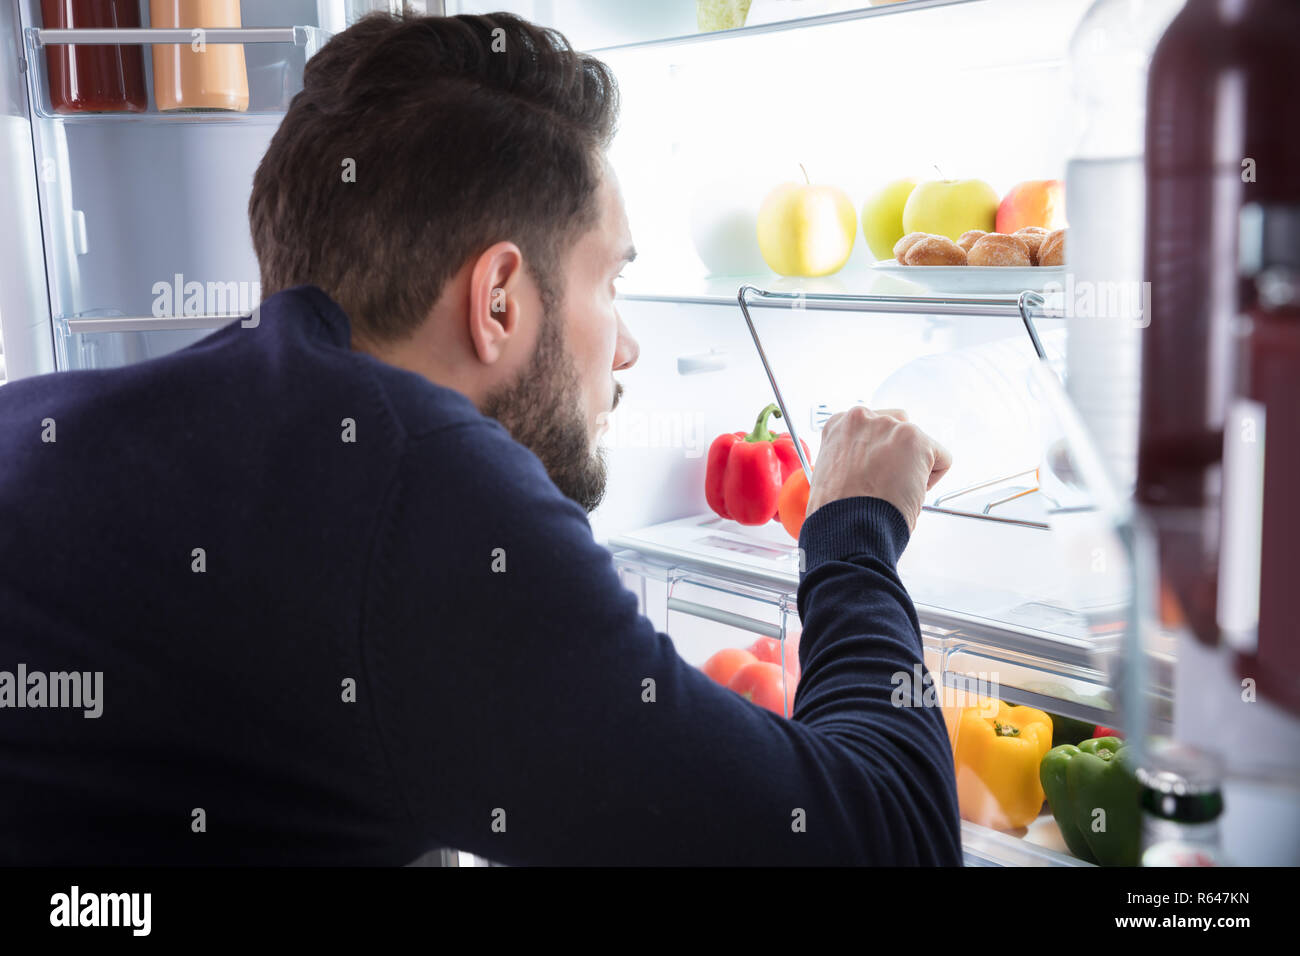 Man Removing Water Bottle From Refrigerator Stock Photo